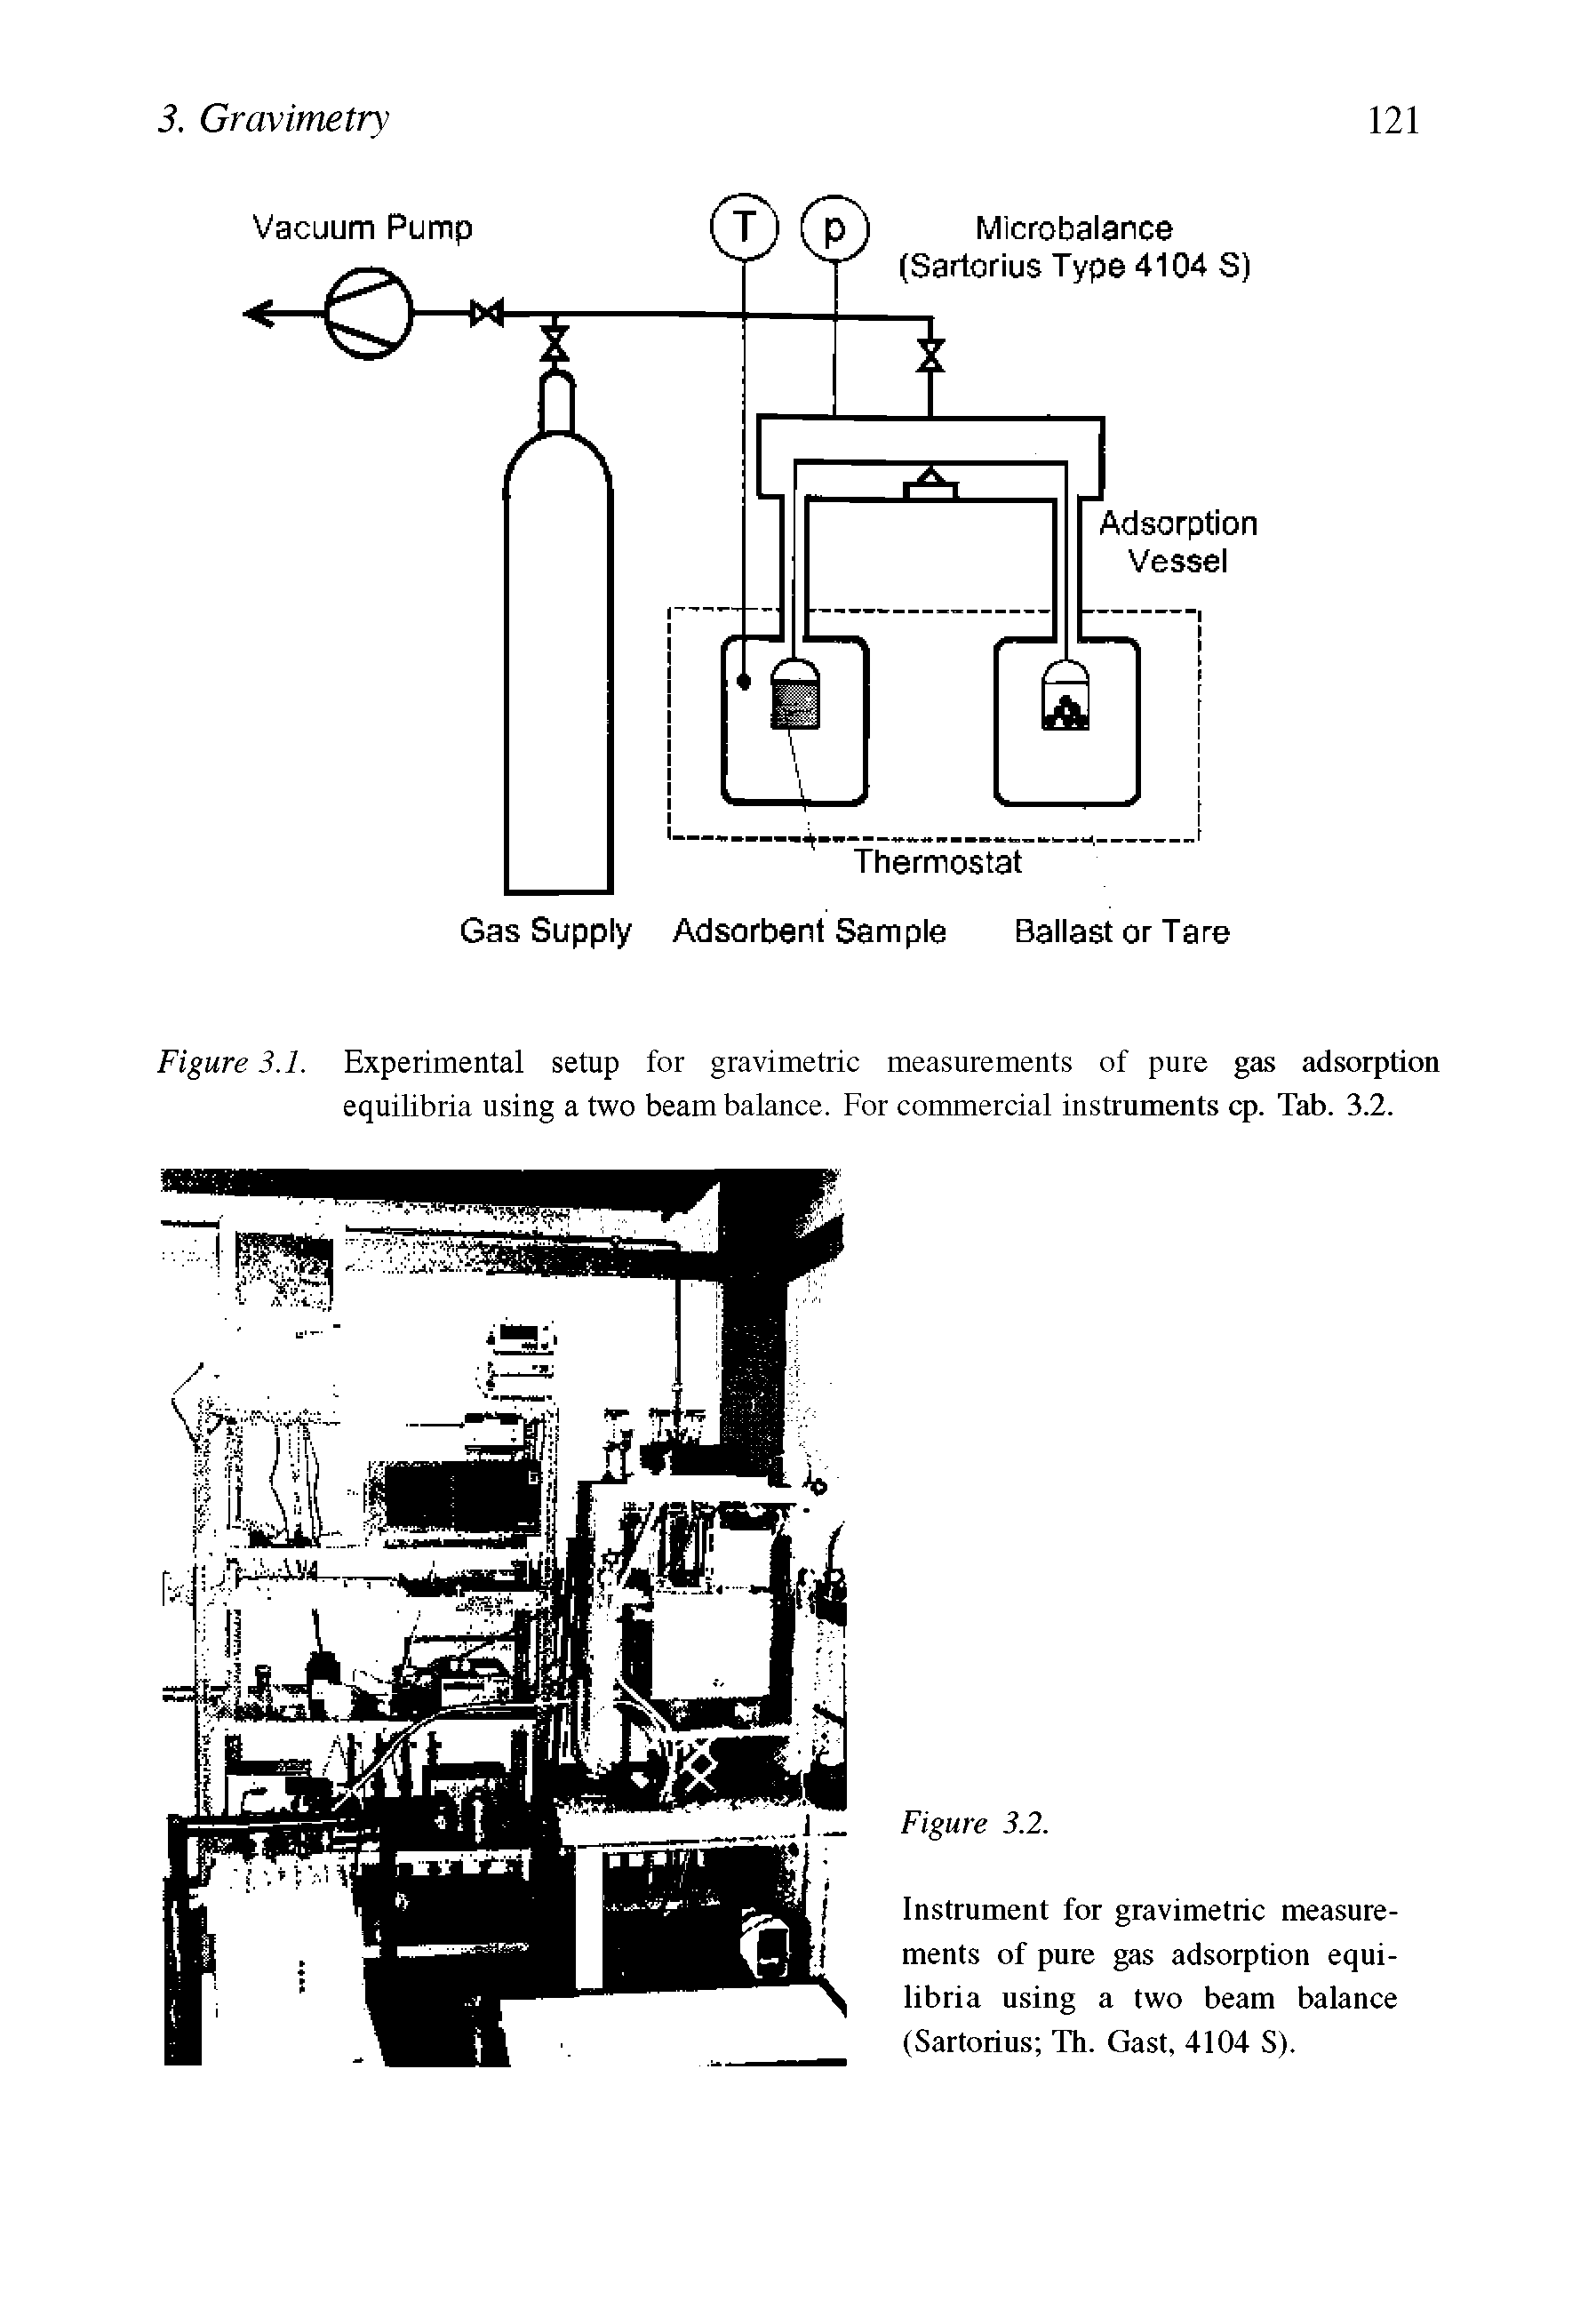 Figure 3.1. Experimental setup for gravimetric measurements of pure gas adsorption equilibria using a two beam balance. For commercial instruments cp. Tab. 3.2.